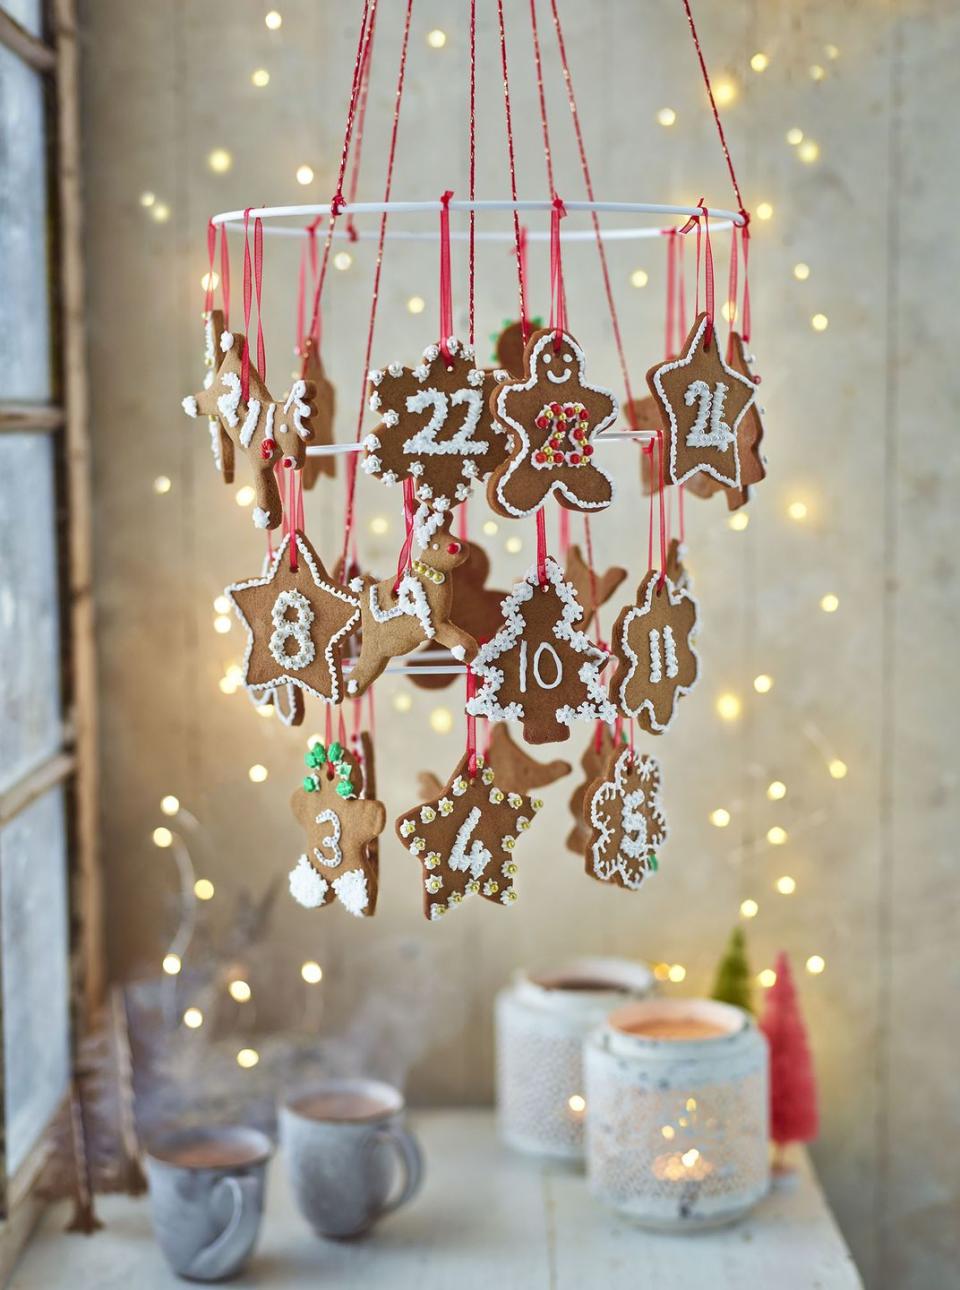 <p>The perfect Christmas baking project for kids, this gingerbread biscuit advent calendar is in mobile form - but they make great <a href="https://www.goodhousekeeping.com/uk/christmas/christmas-countdown/g24512415/fake-christmas-tree/" rel="nofollow noopener" target="_blank" data-ylk="slk:Christmas tree" class="link ">Christmas tree</a> decorations too.</p><p><strong>Recipe: <a href="https://www.goodhousekeeping.com/uk/food/recipes/a25306778/gingerbread-advent-calendar/" rel="nofollow noopener" target="_blank" data-ylk="slk:Gingerbread Advent Mobile" class="link ">Gingerbread Advent Mobile</a></strong></p>